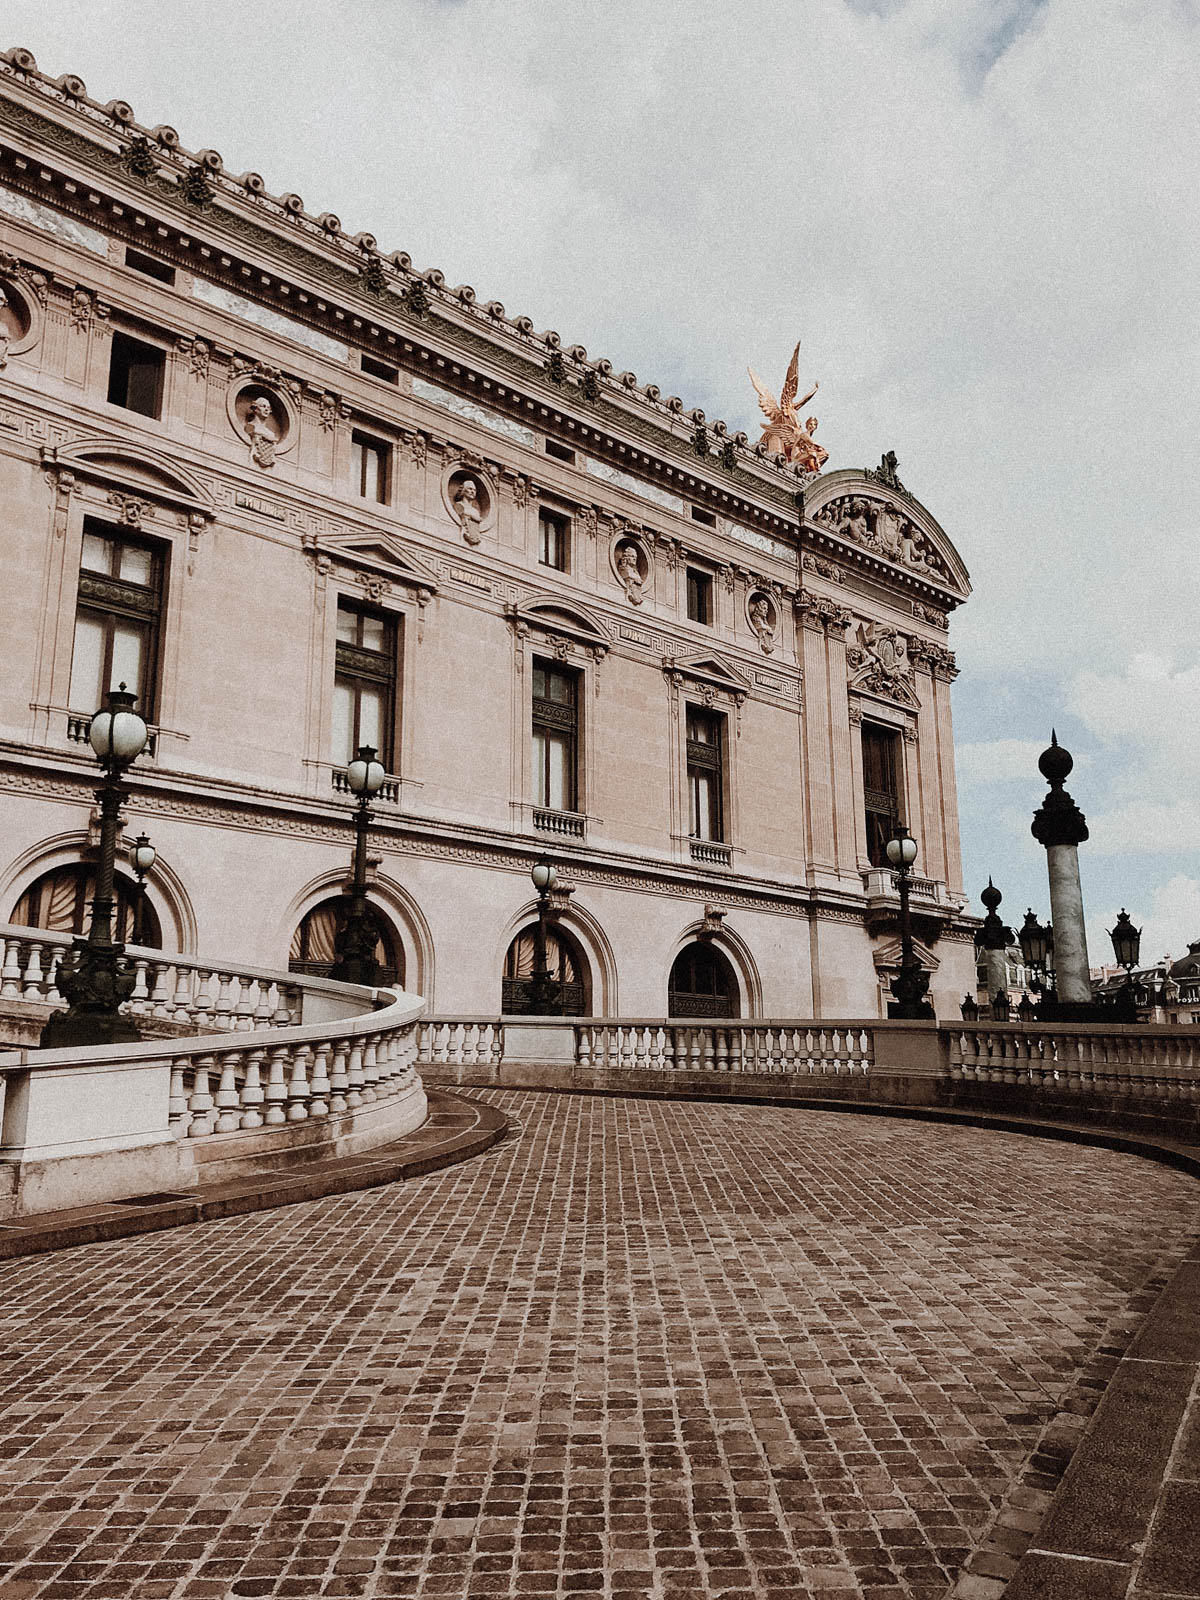 Paris France Travel Guide - Opera House, European Architecture and Buildings / RG Daily Blog